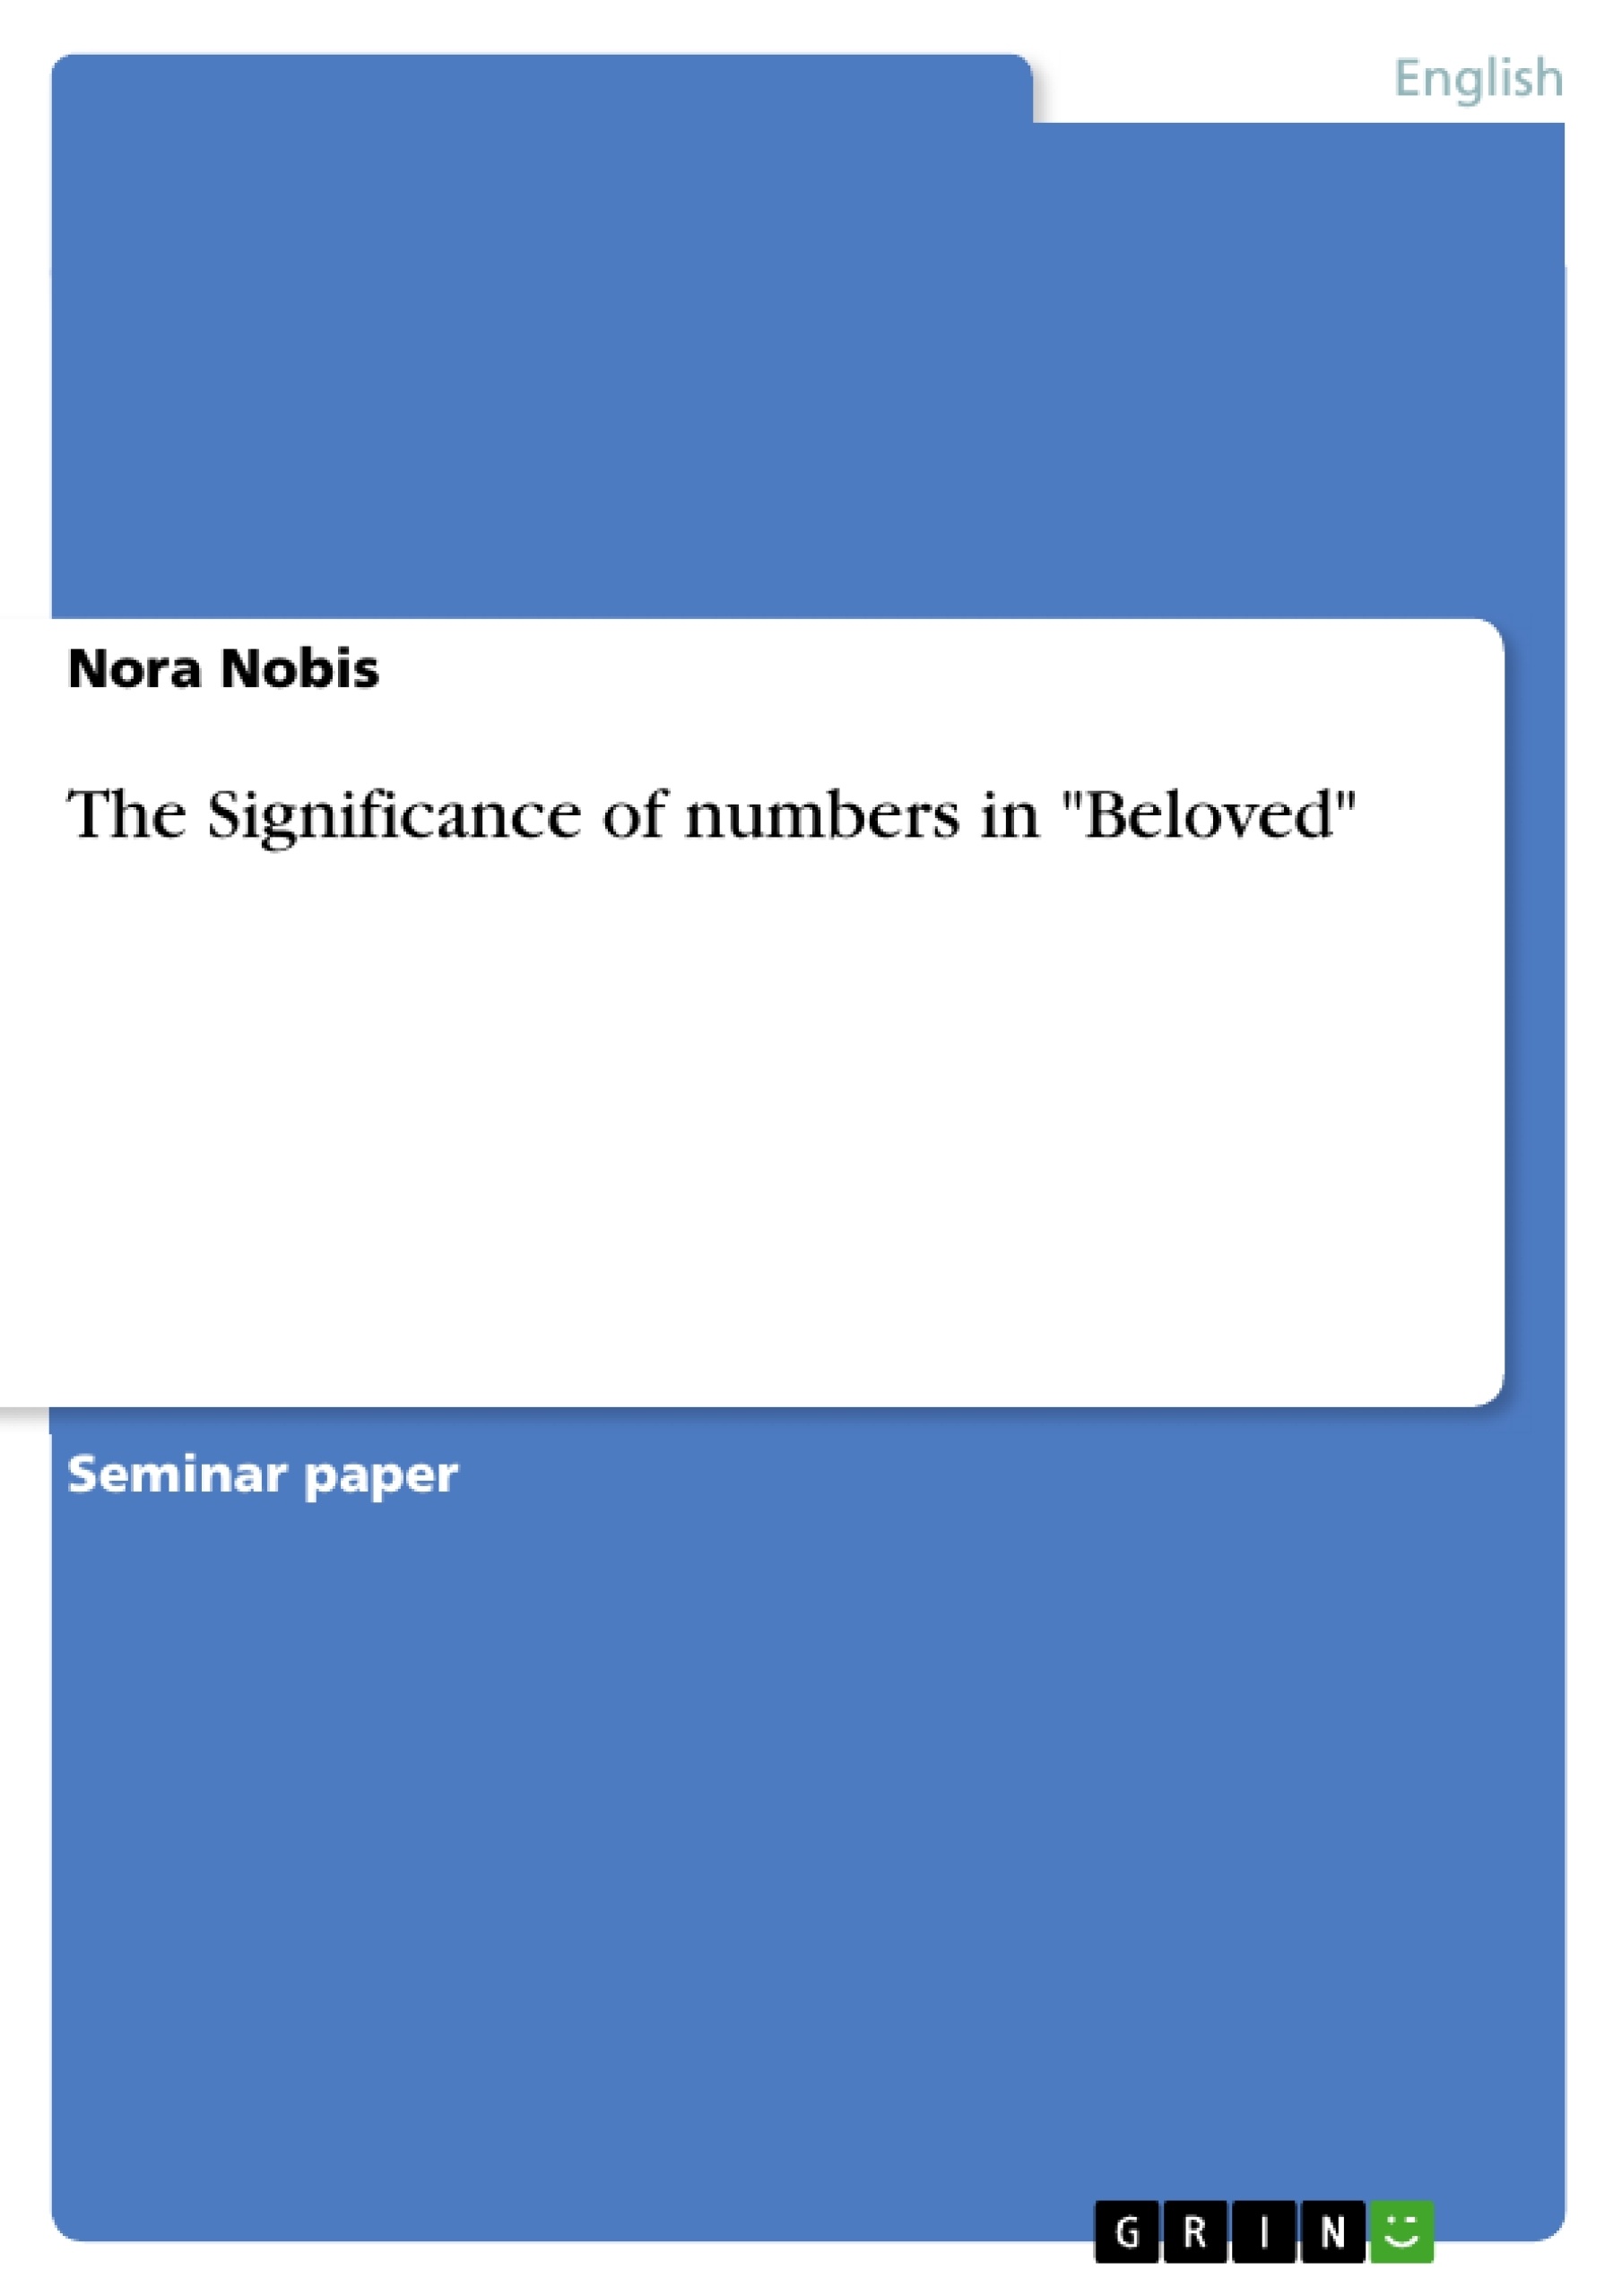 Titre: The Significance of numbers in "Beloved"